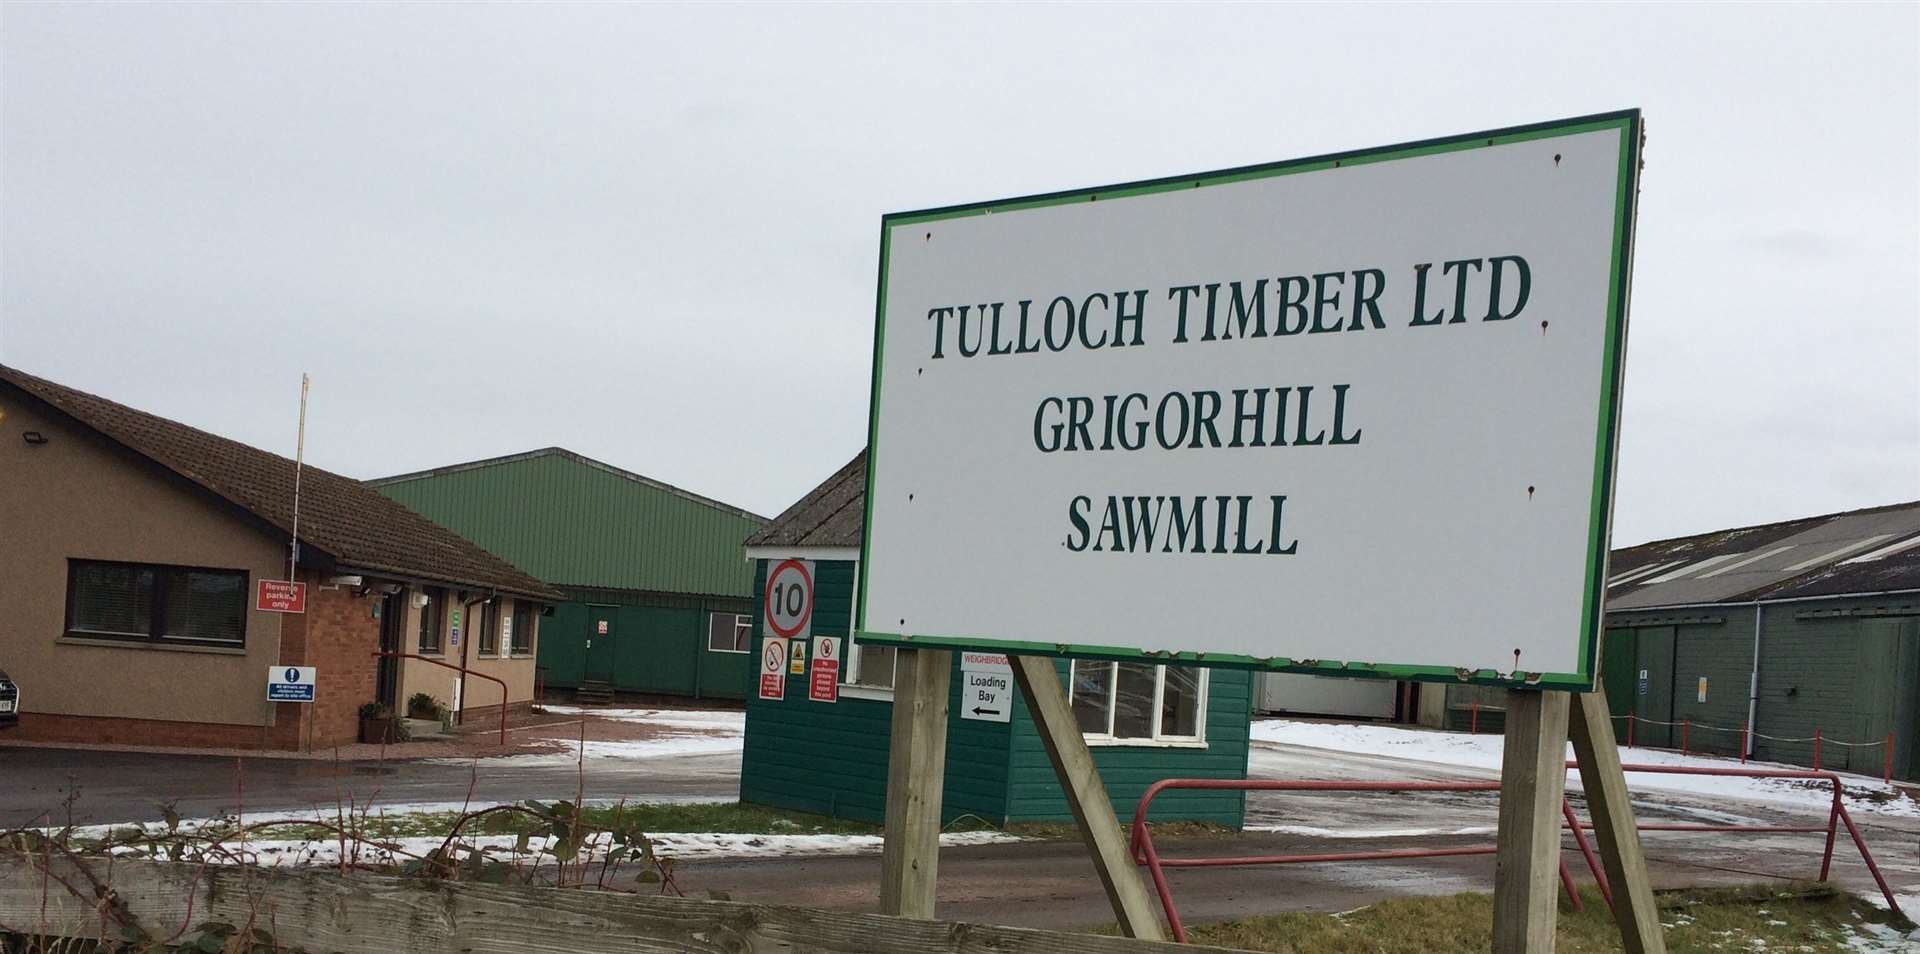 Tulloch Timber Ltd is to increase efficiency and create two new jobs with a £250k investment.